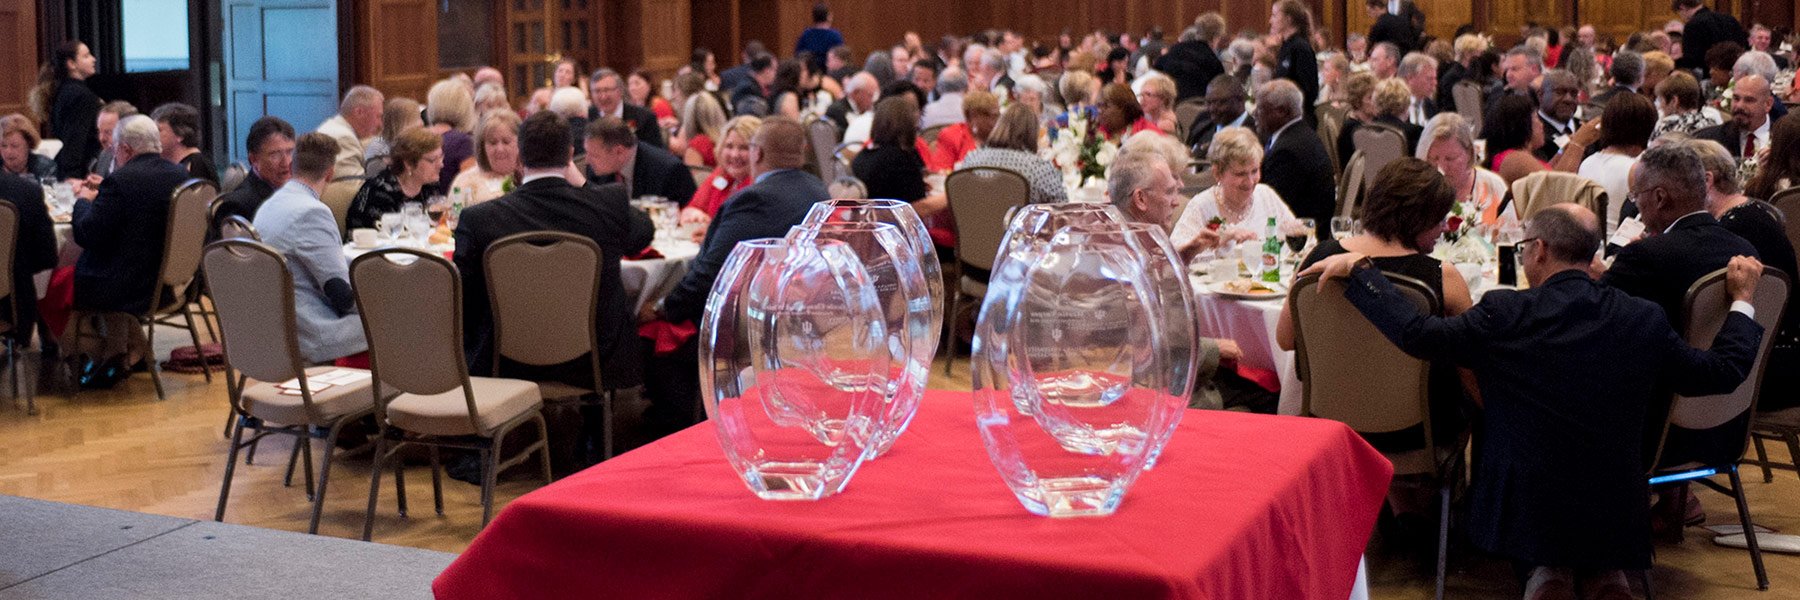 Four glass awards sit on a red table in front of a crowd of people sitting at round tables